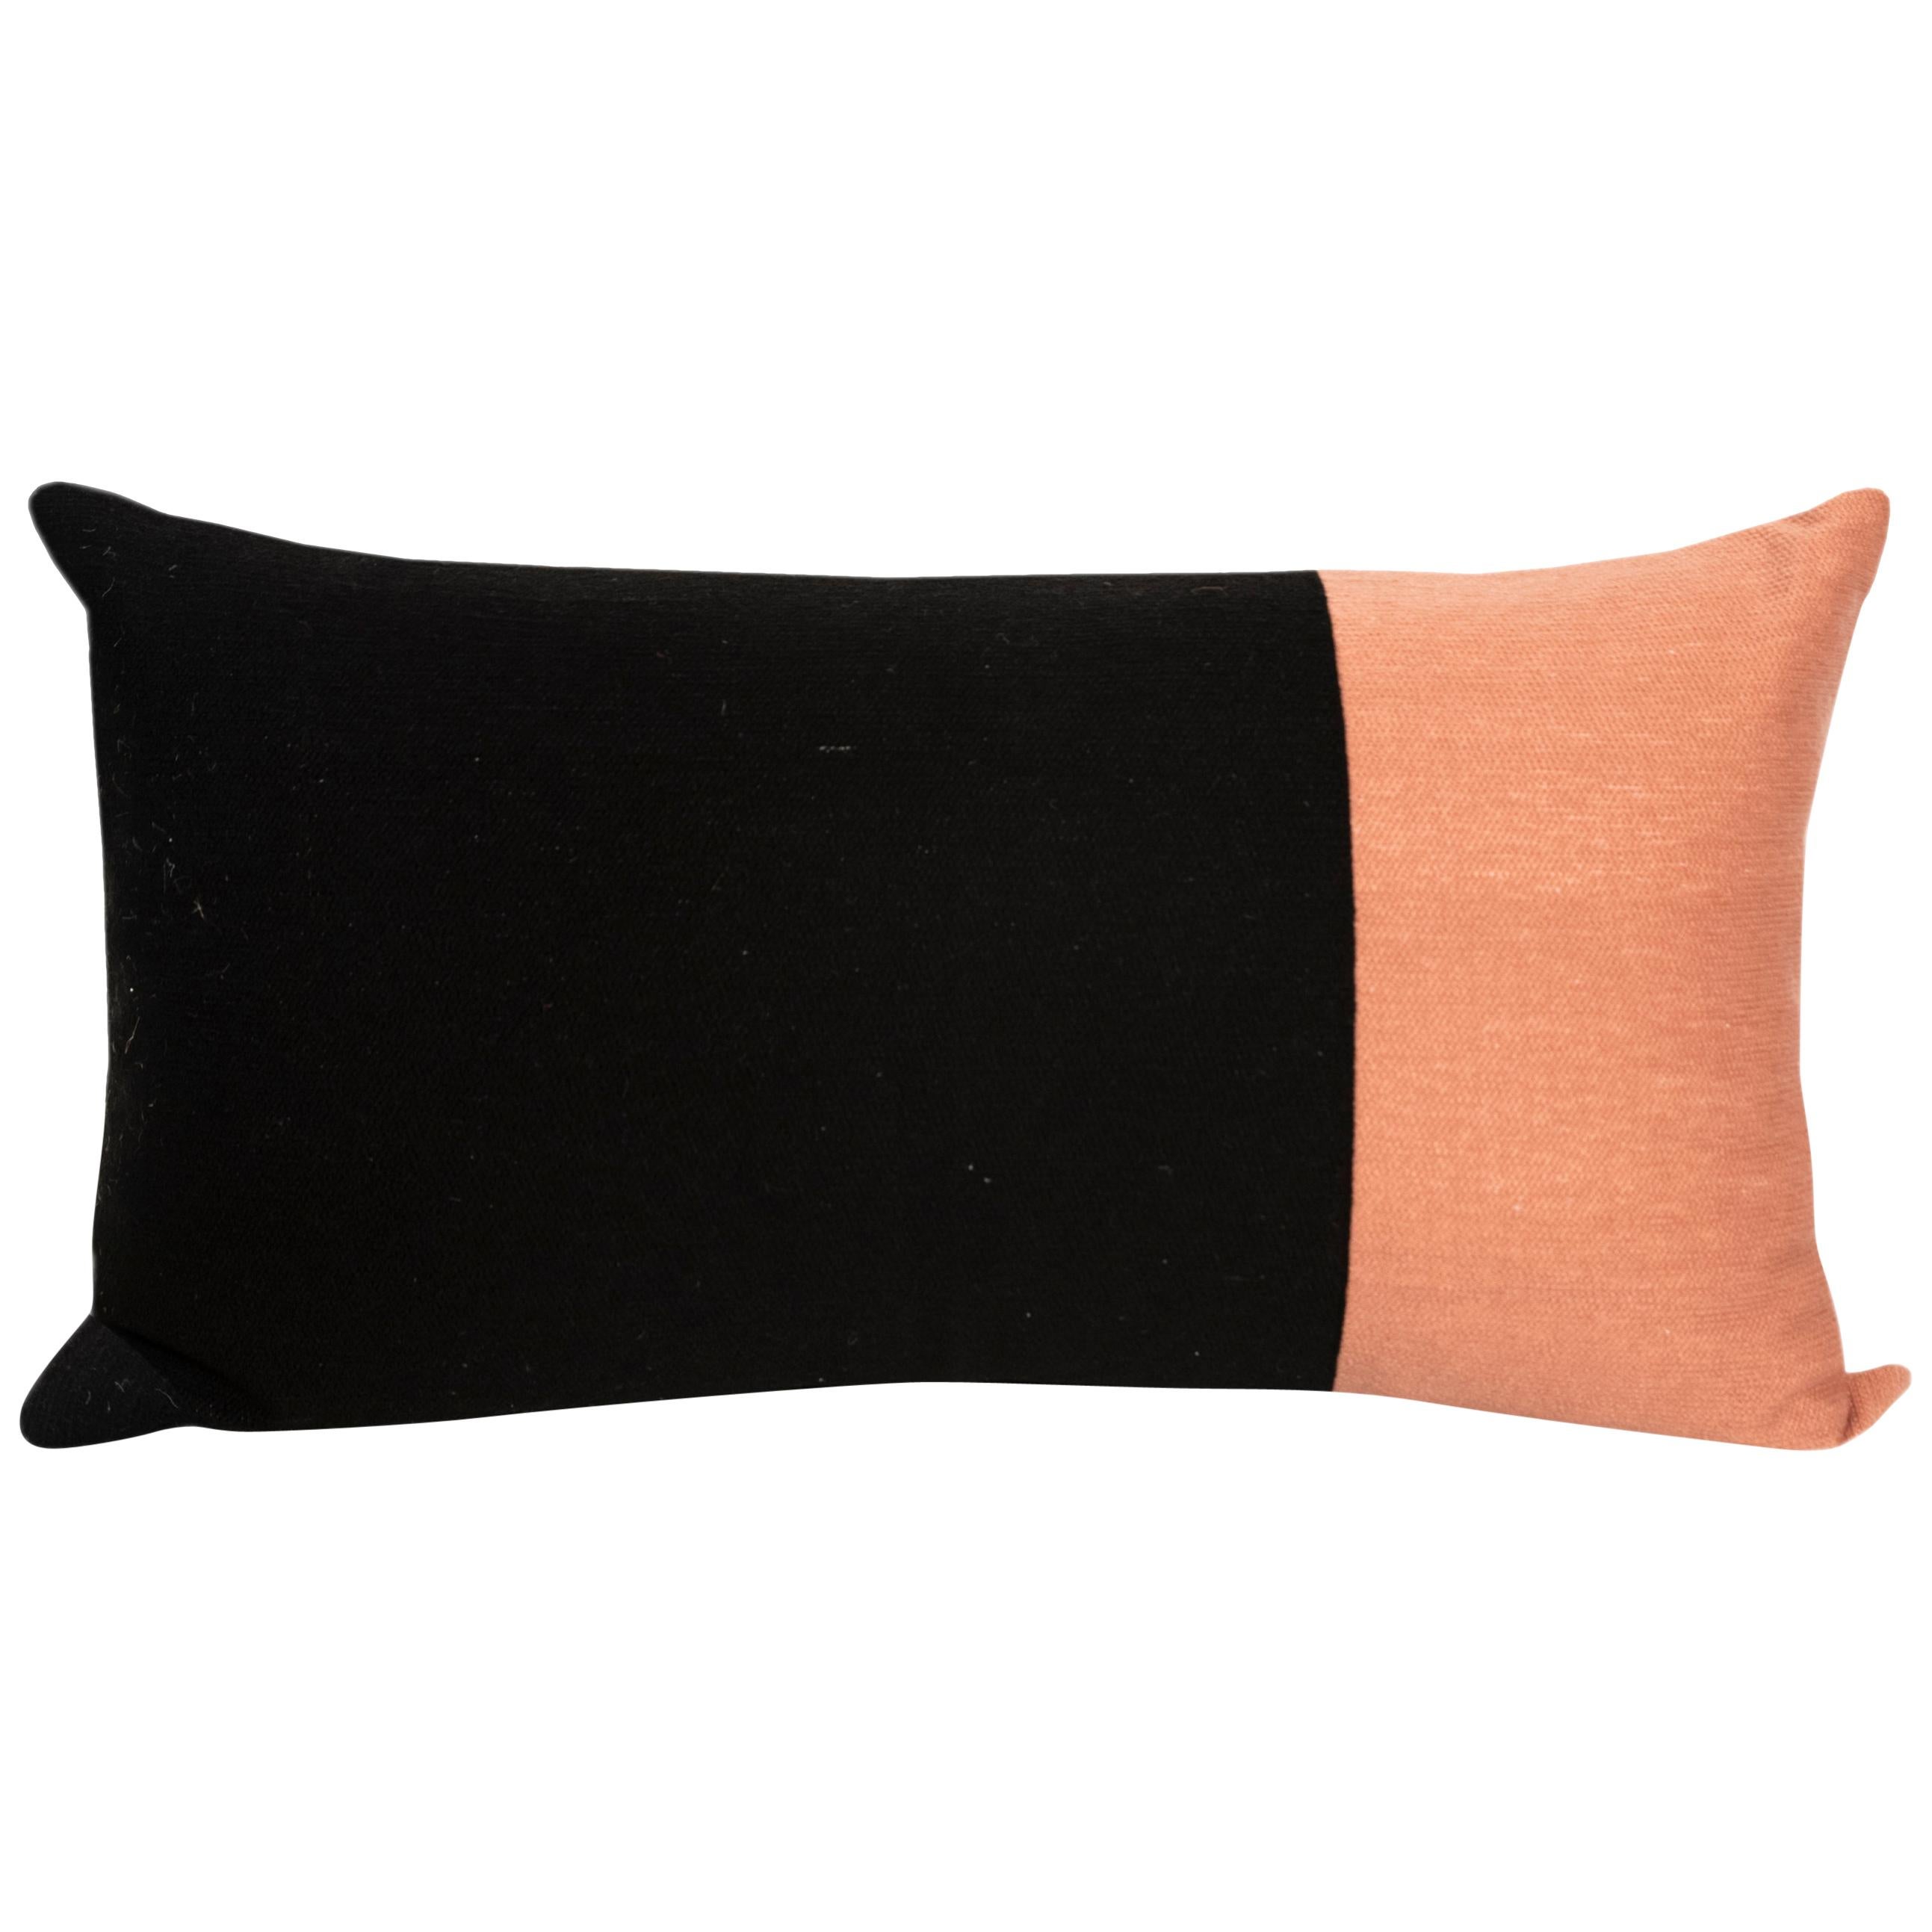 Contemporary Modern Embroidery Pillow Cushion Cotton Geometric Black and Salmon